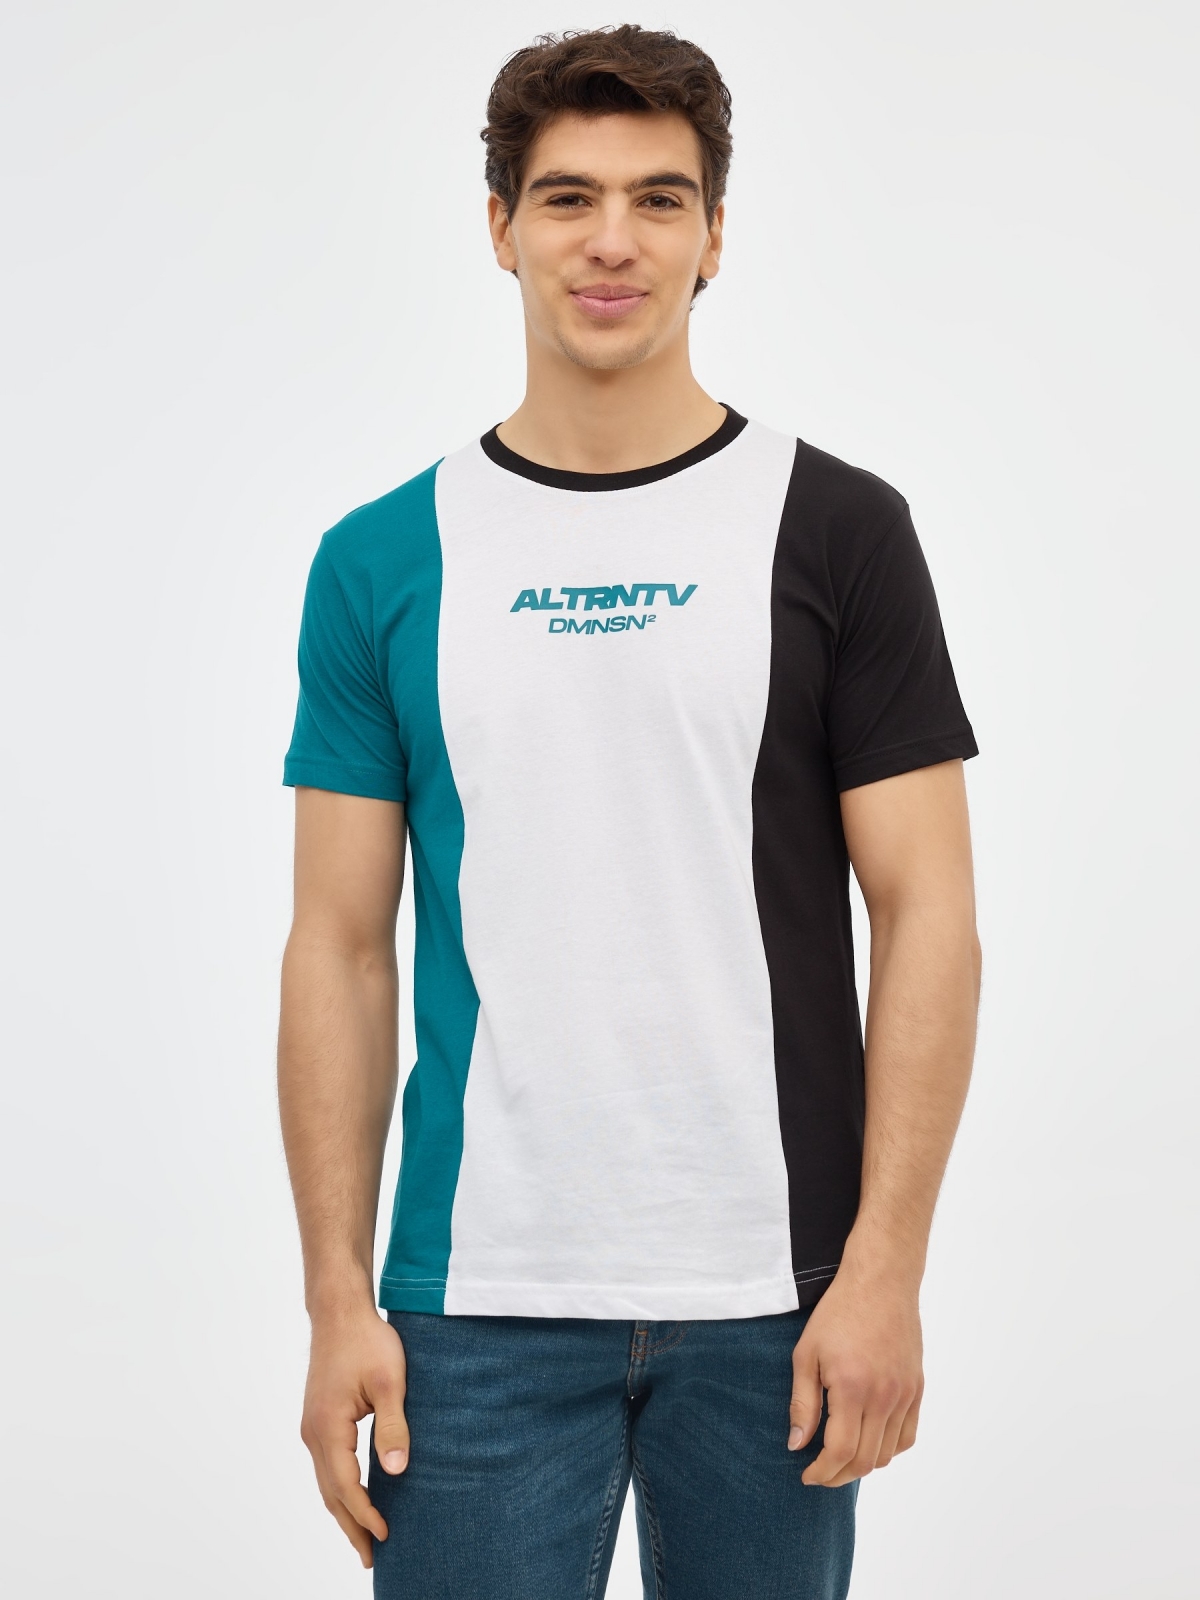 ALTRNTV T-shirt black middle front view